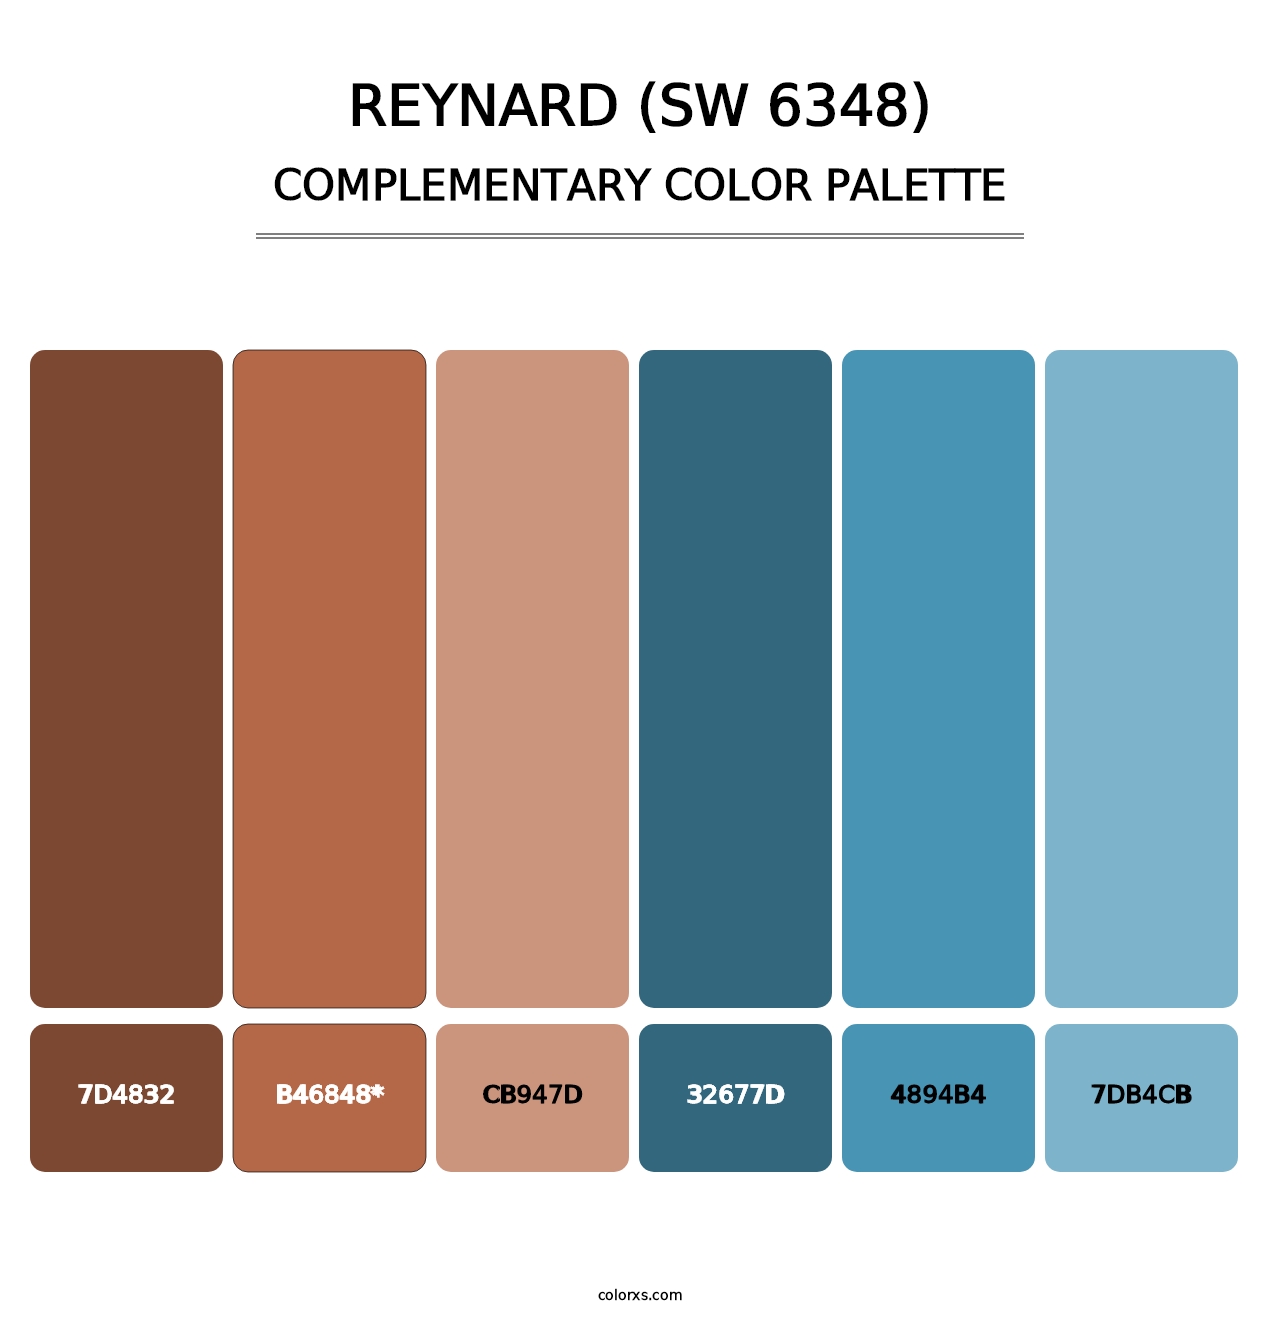 Reynard (SW 6348) - Complementary Color Palette